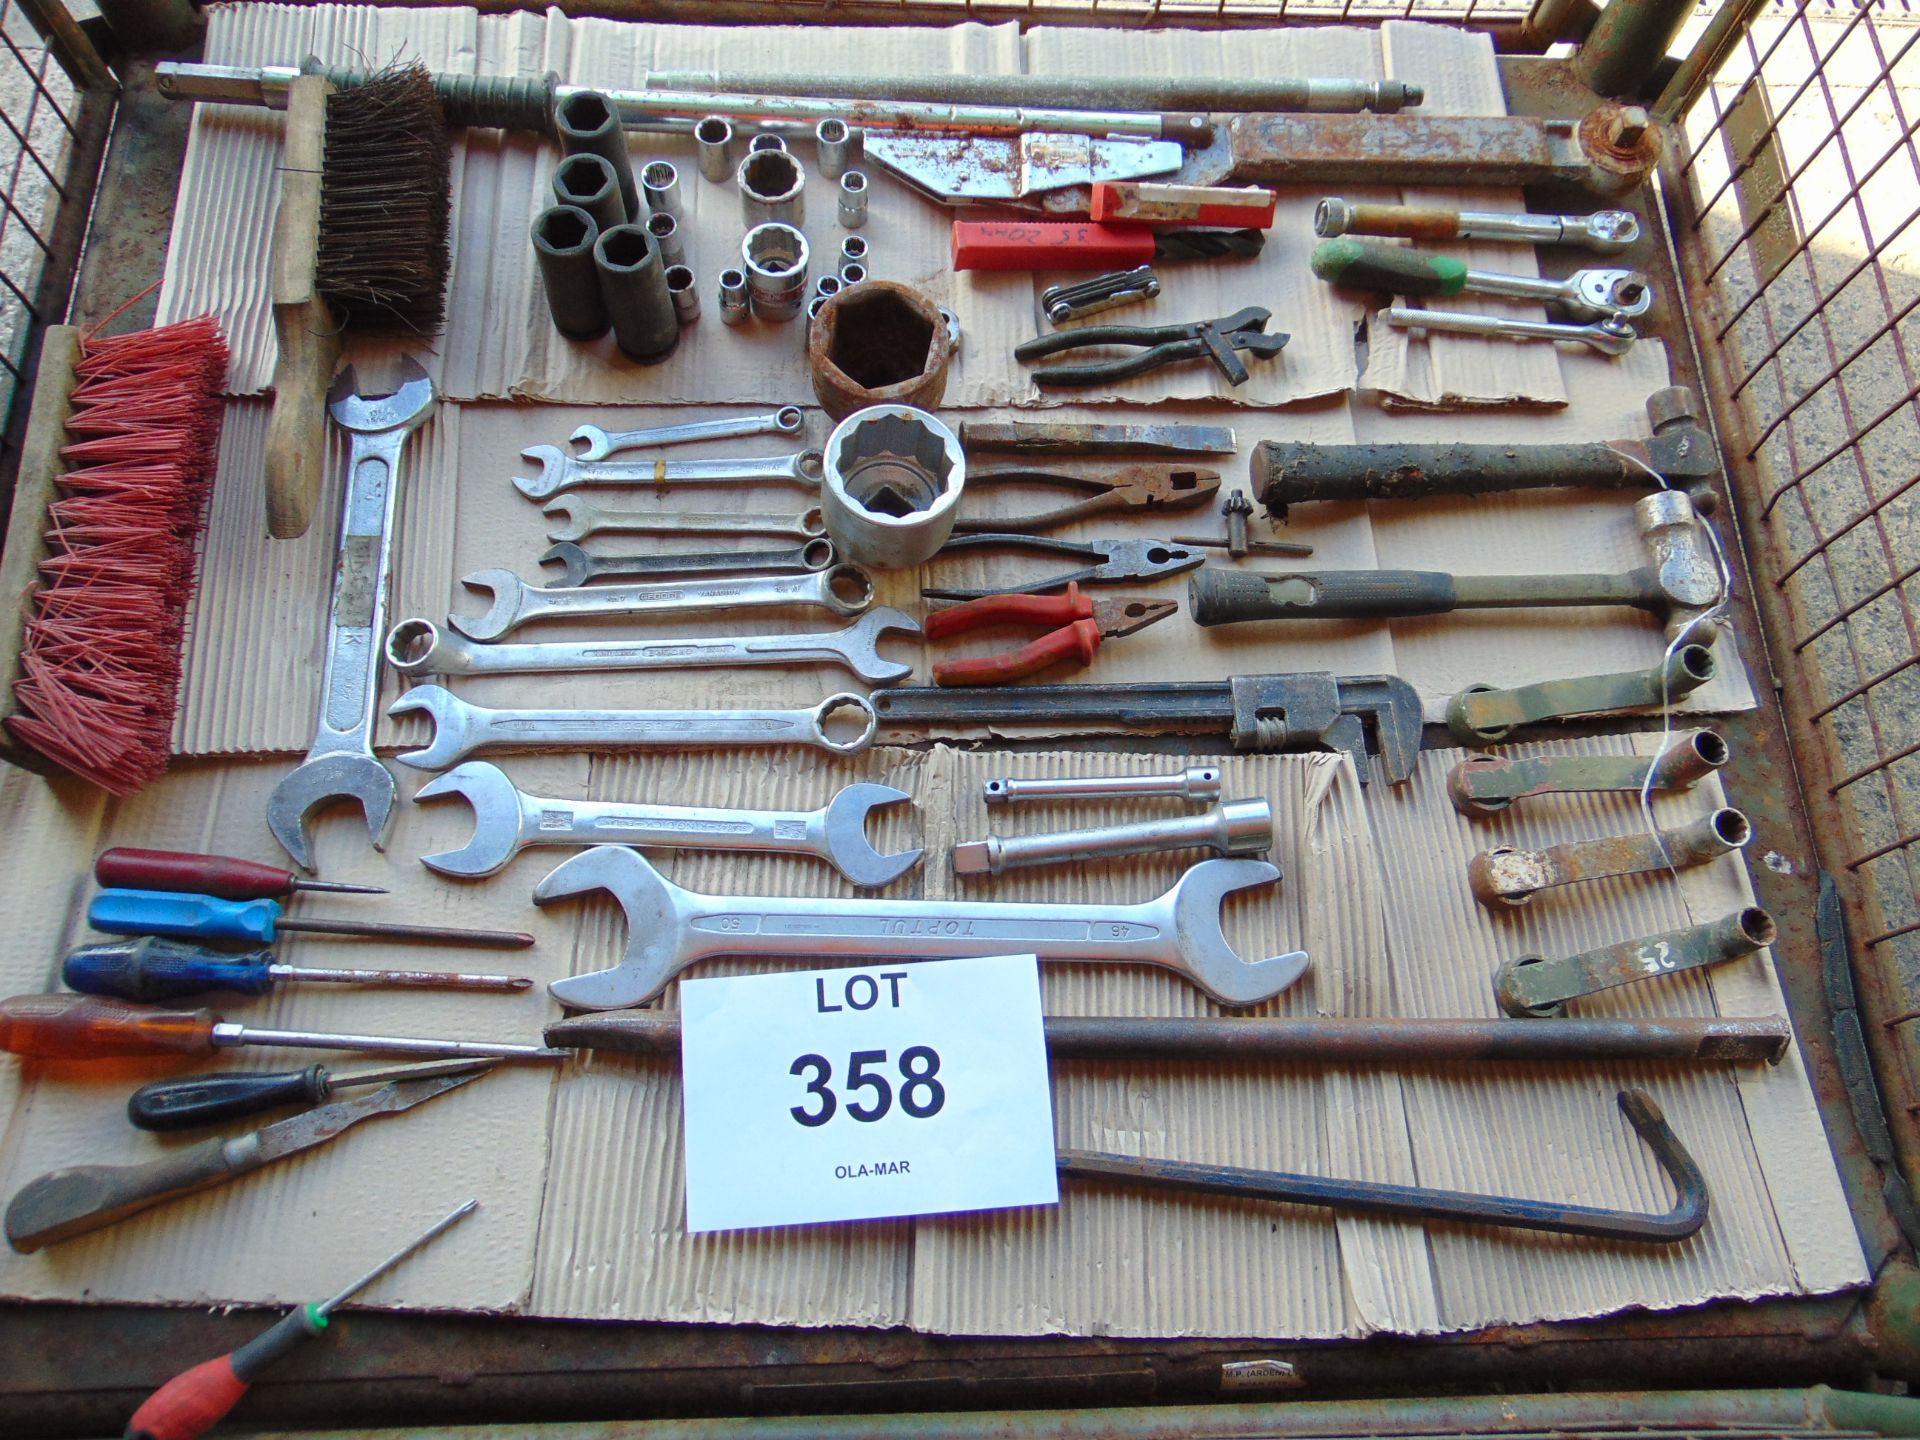 1x Stillage of Tools inc Sockets, Spanners etc - Image 2 of 4